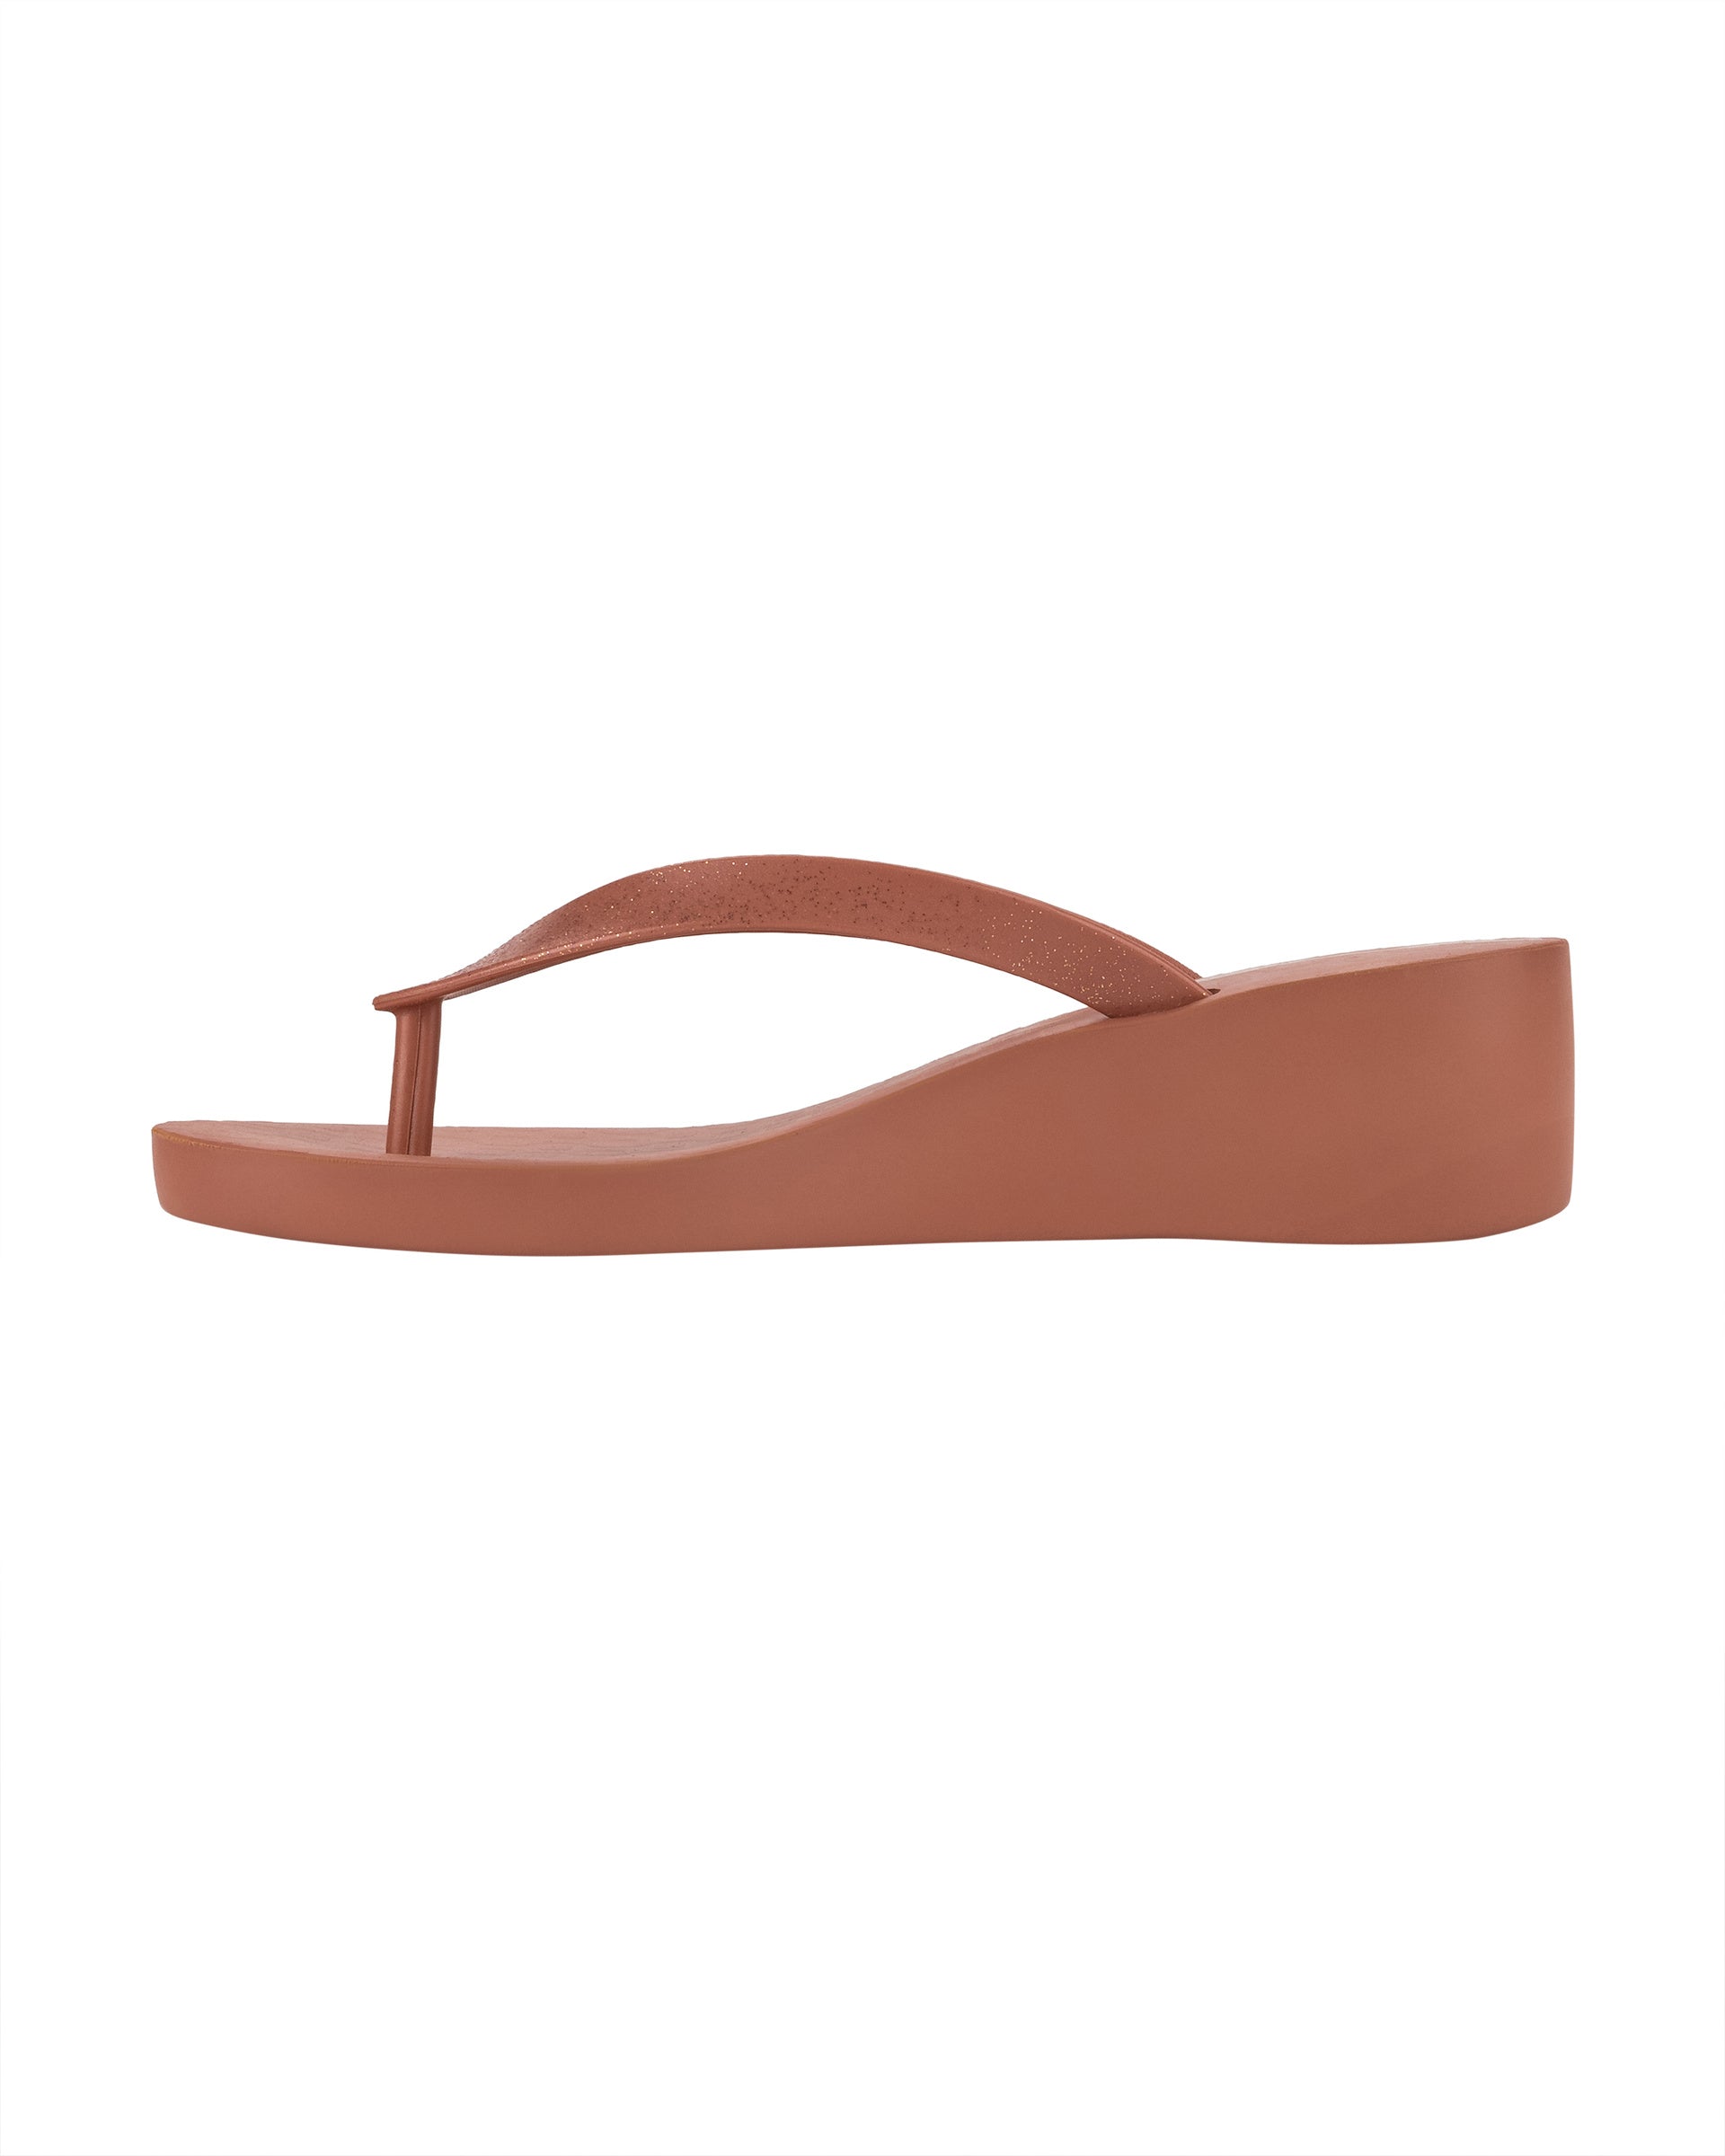 Inner side view of a pink Ipanema Selfie women's wedge flip flop with glitter pink straps.